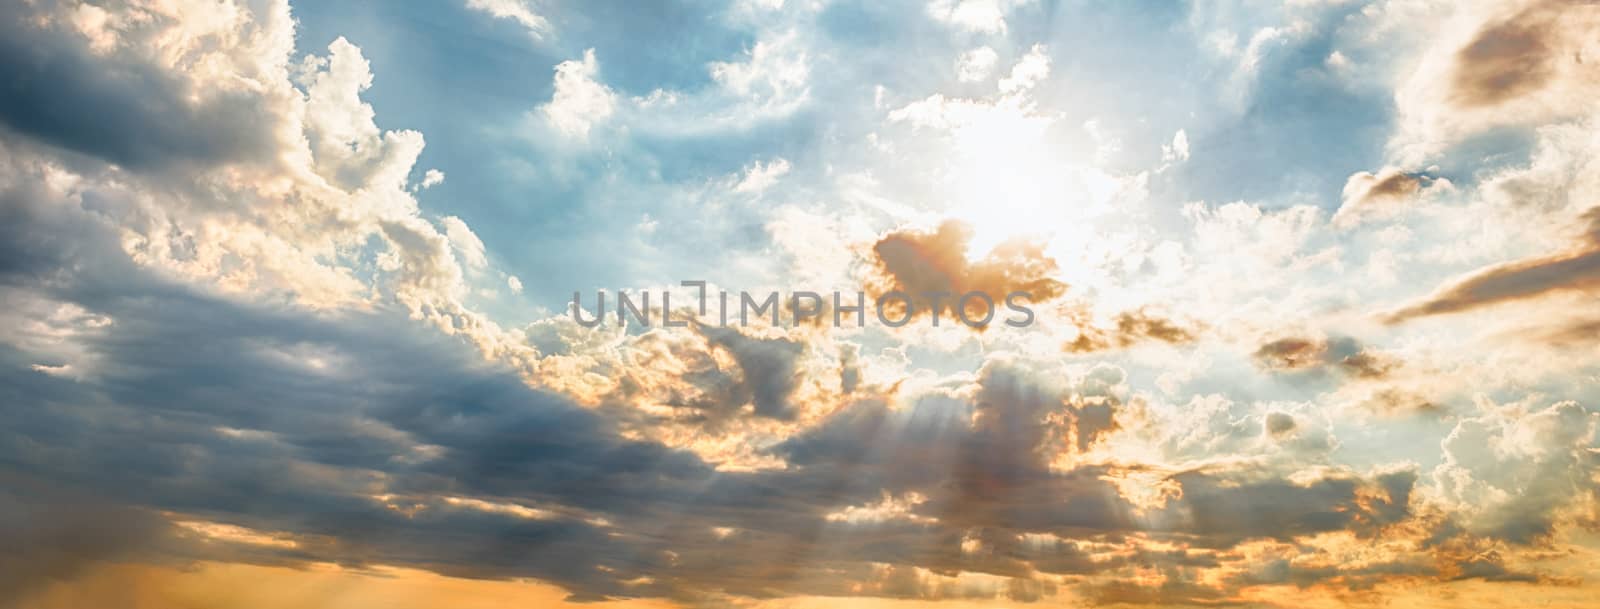 Blue sky with beautiful dramatic sunset and copy space, may be used as background